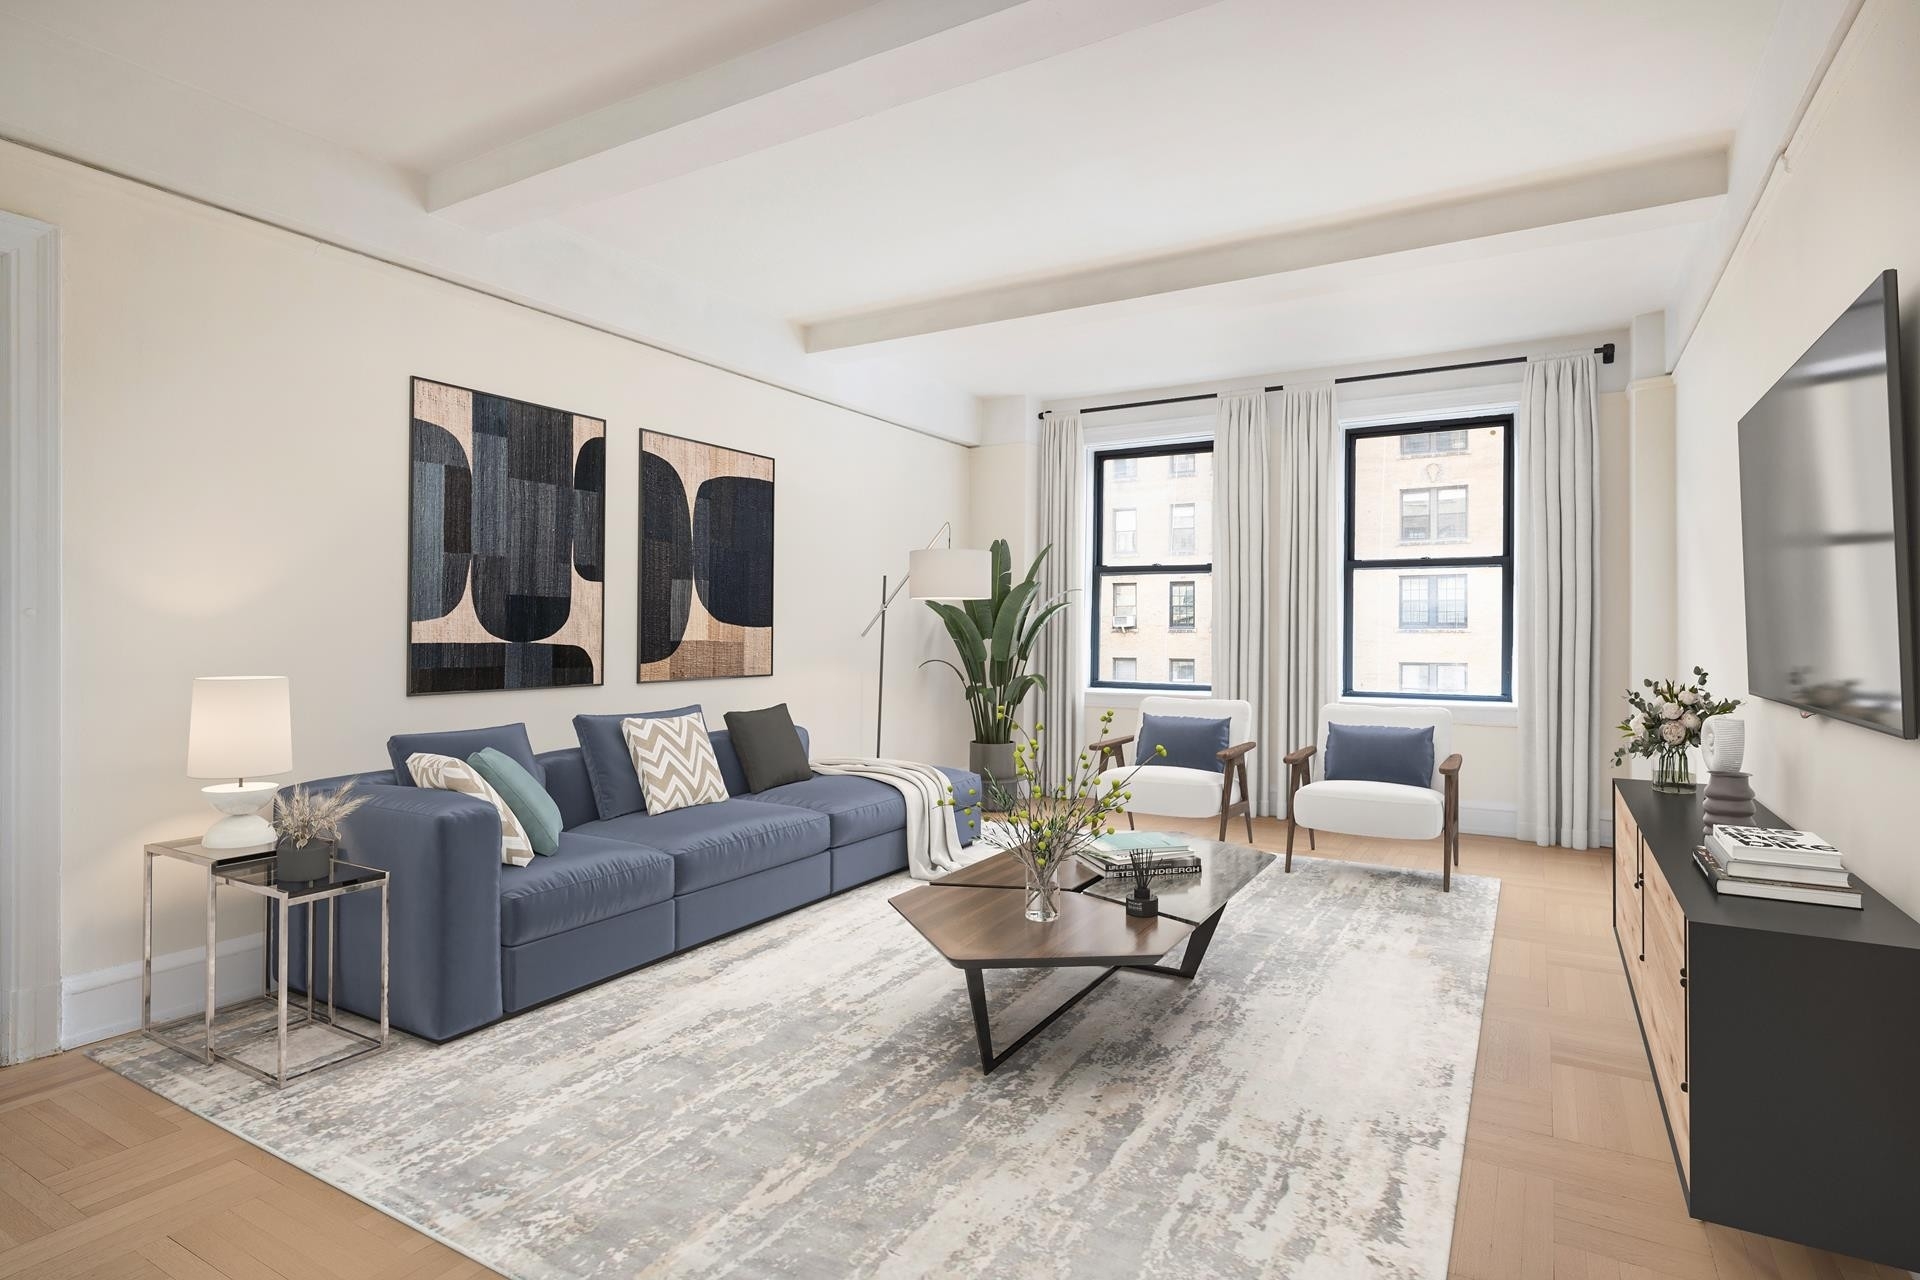 Co-op Properties for Sale at 171 W 79TH ST, 91 Upper West Side, New York, New York 10024